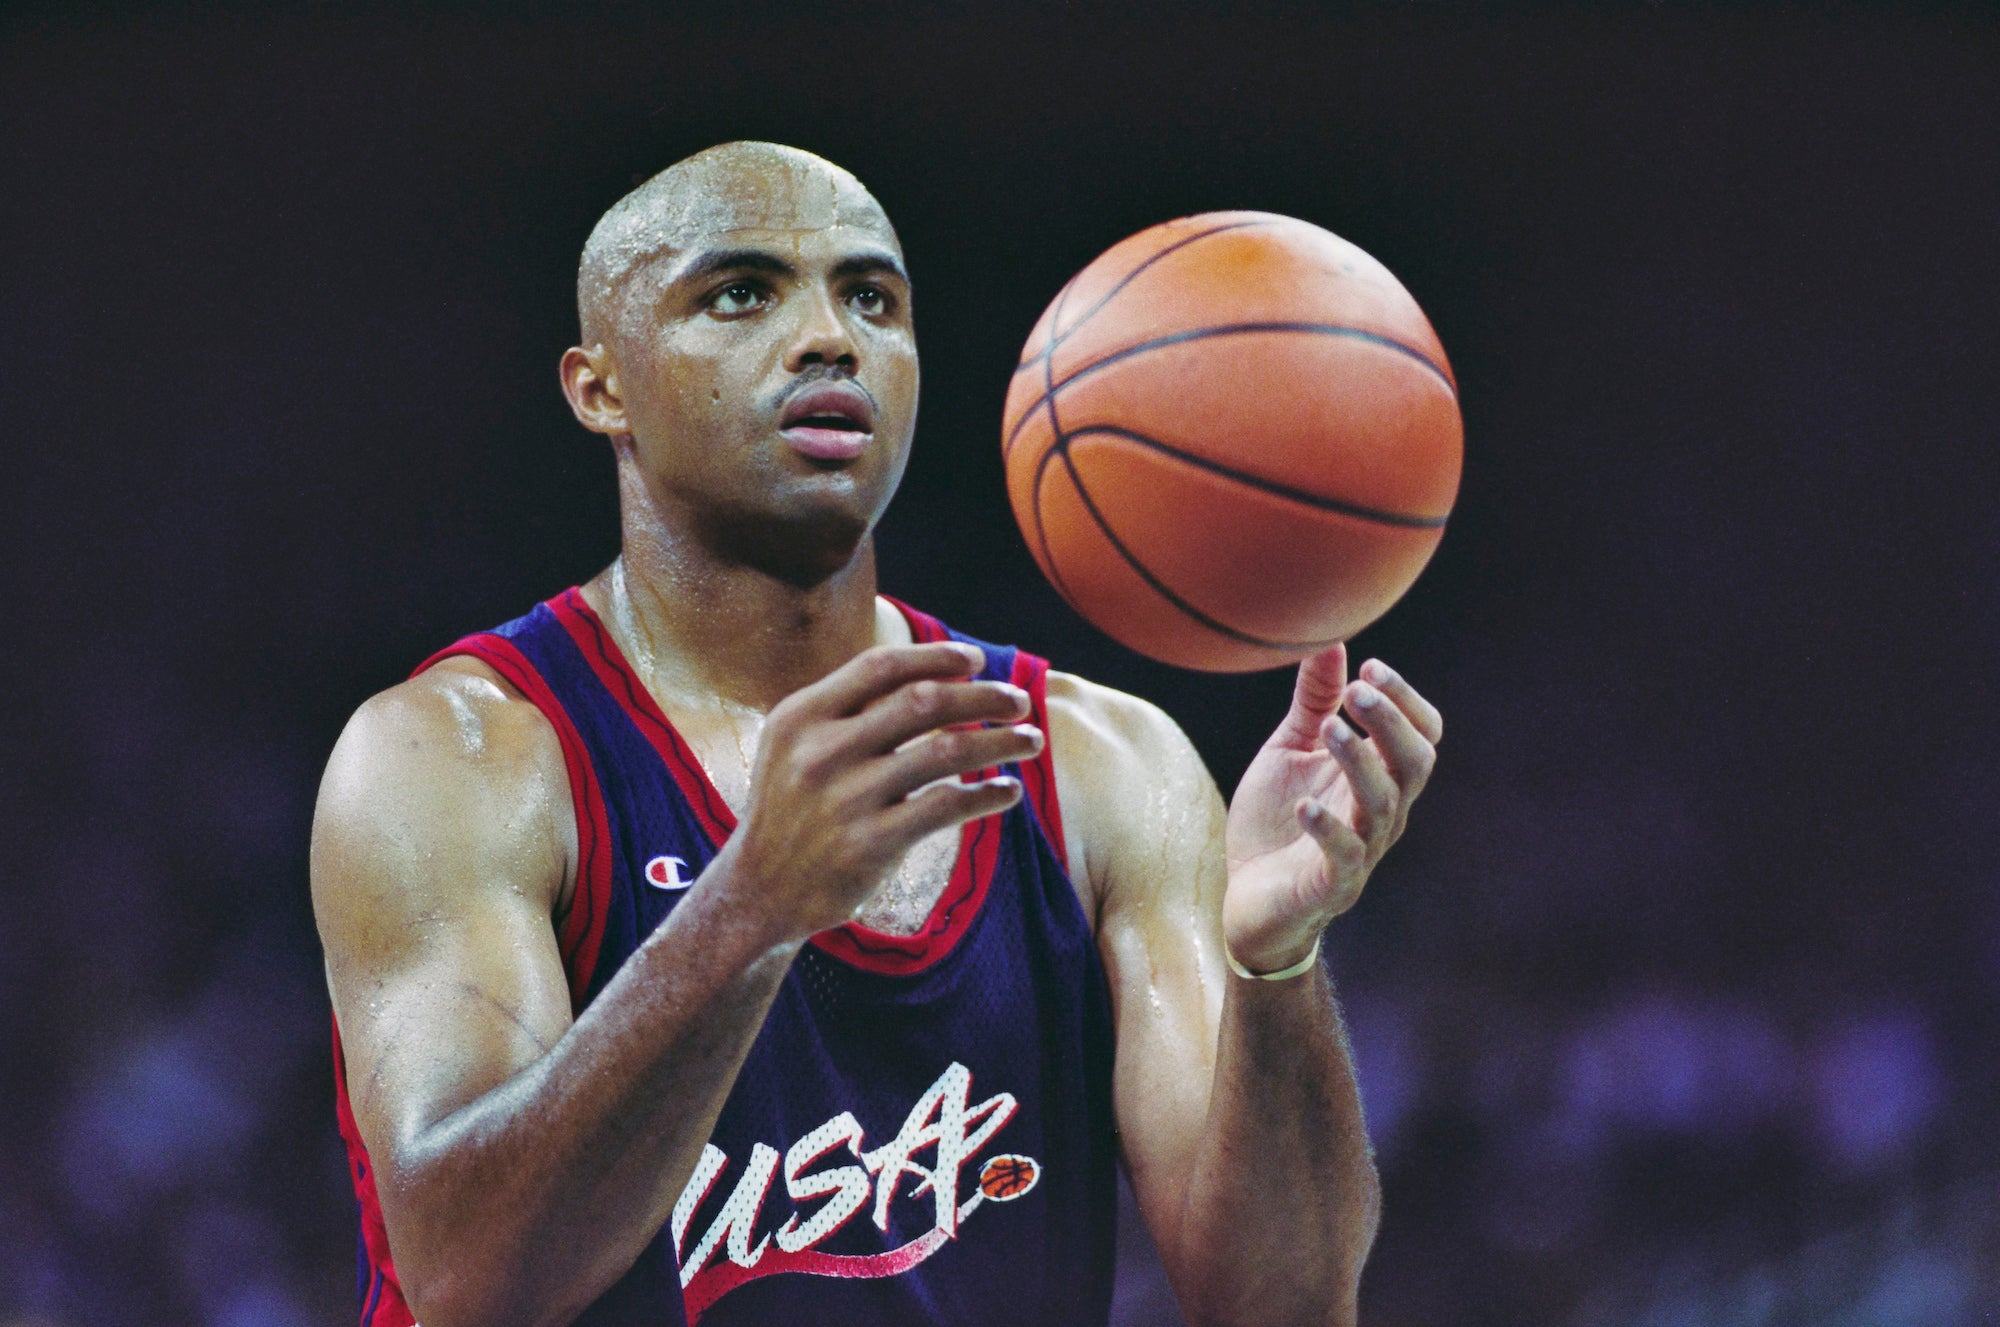 Charles Barkley: NBA Superstar Raised by Single Mom with Grit